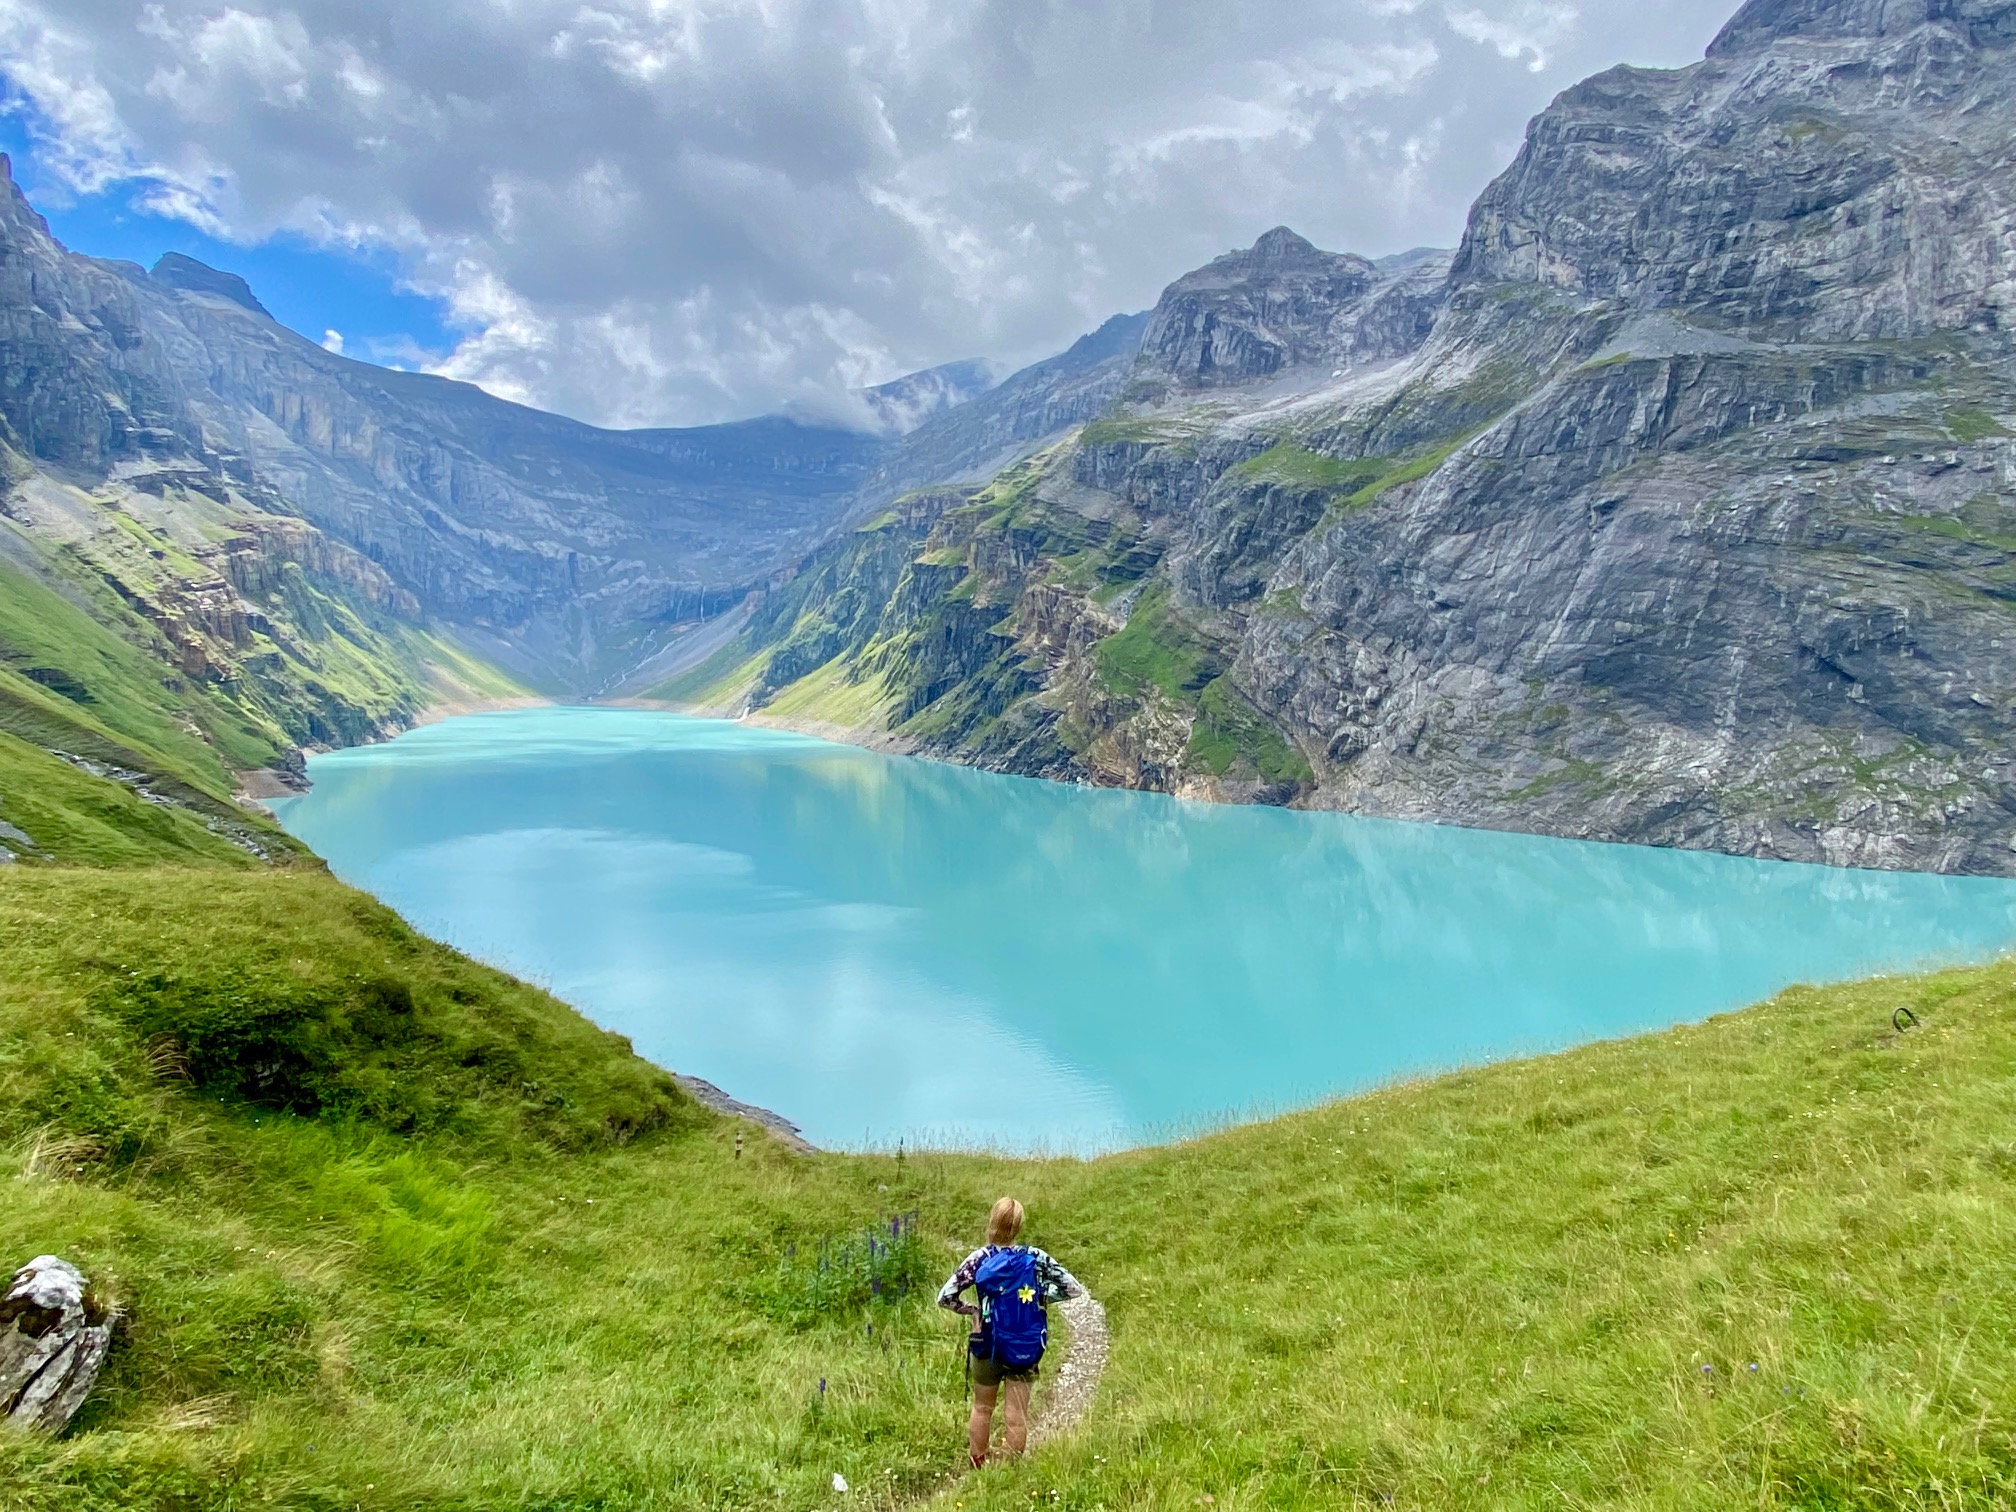 Guided Hike with an Environmental & Swiss Expert (from Interlaken)